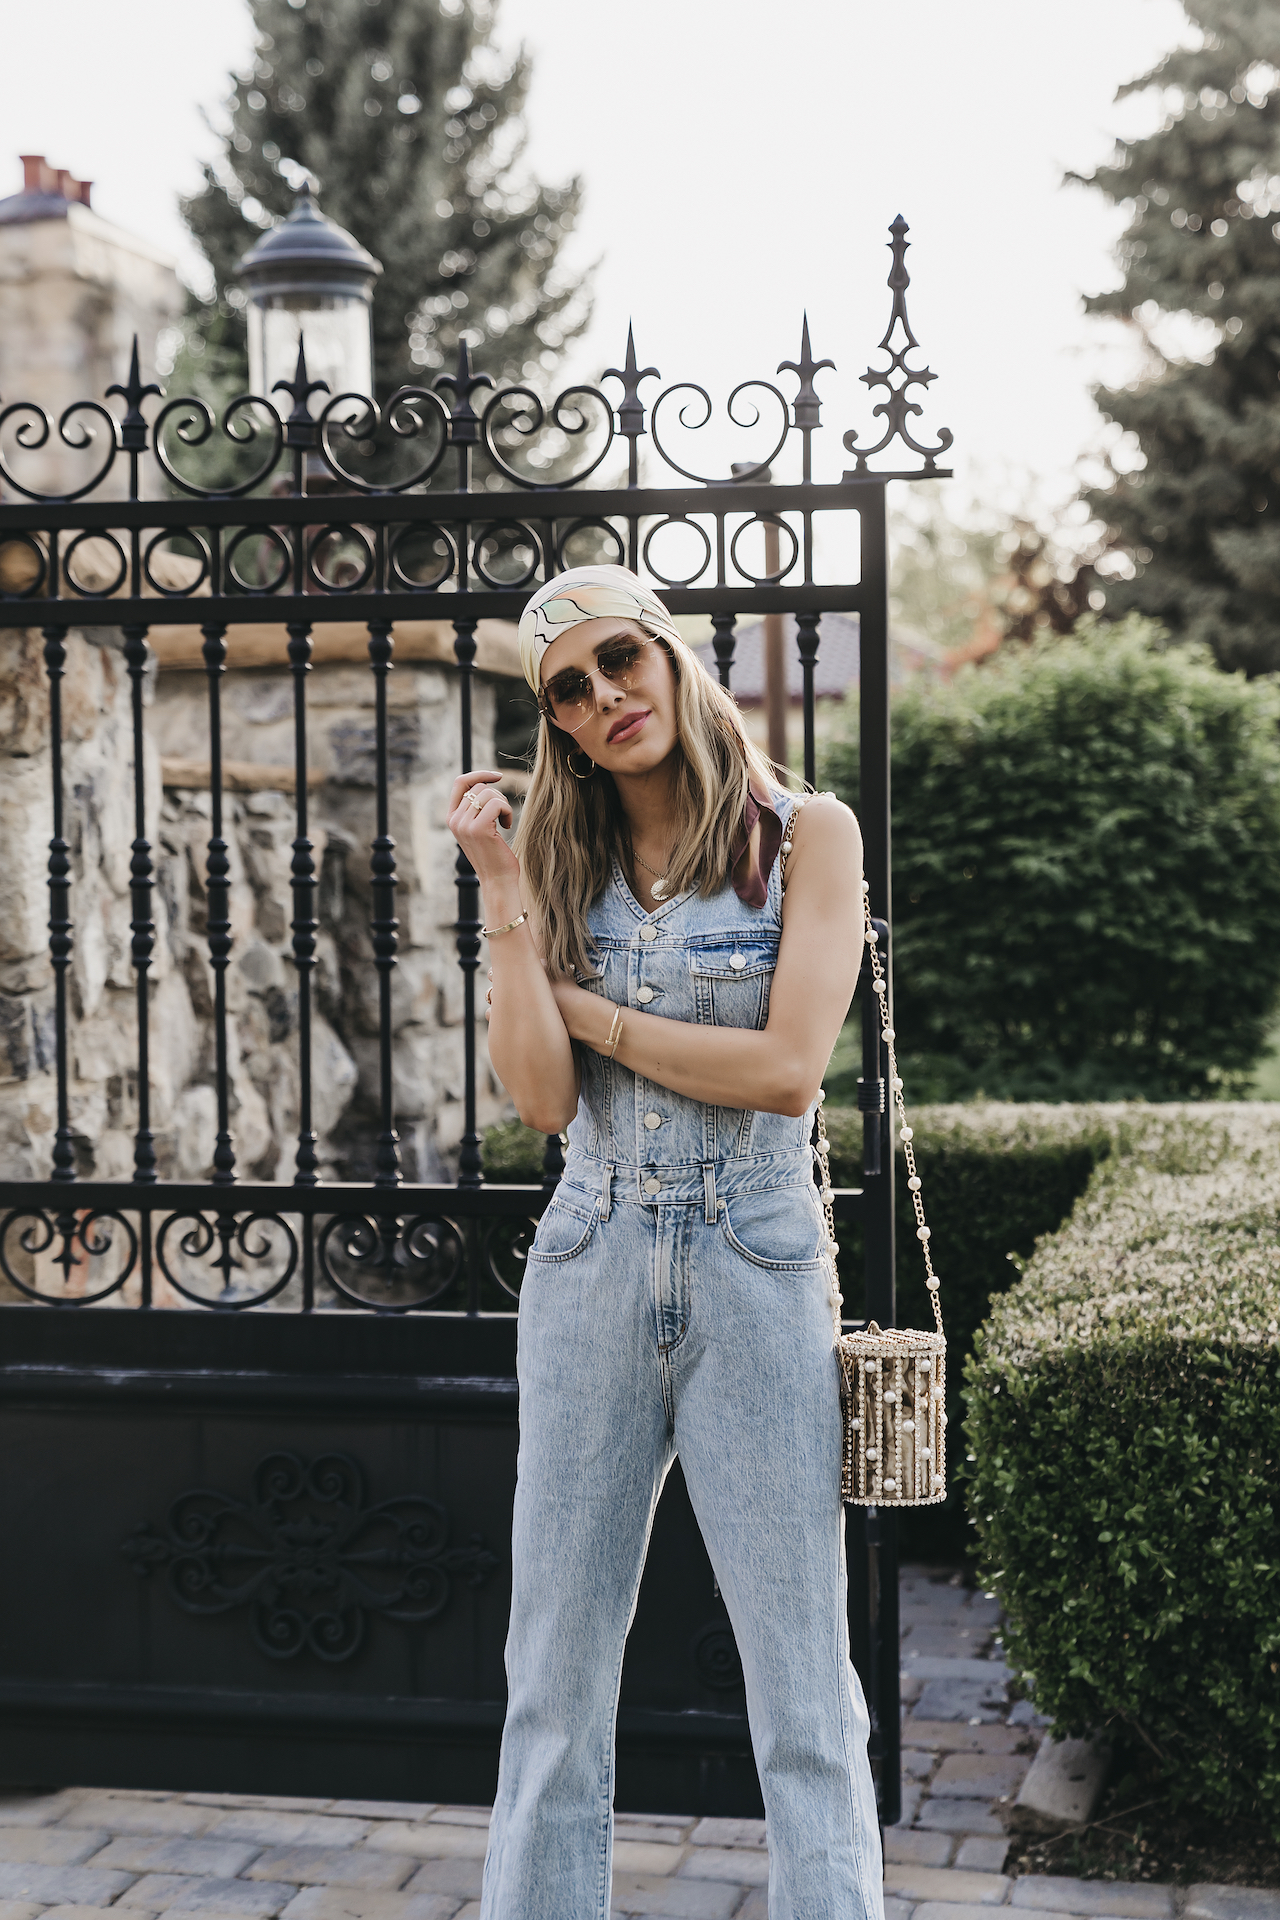 Denim Jumpsuit | A Trend That's Making A Comeback